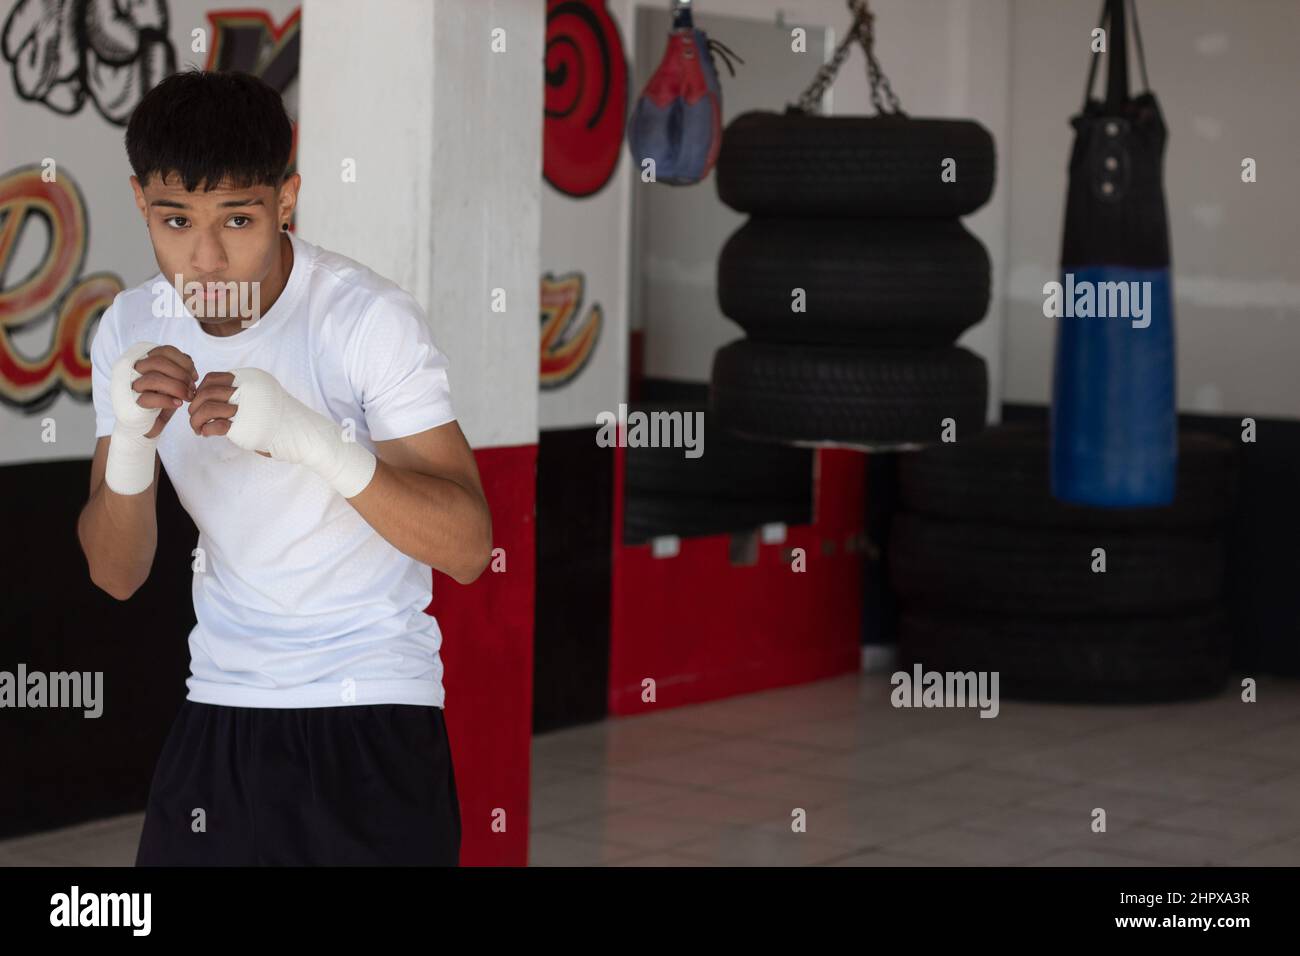 young boxer wearing a white t-shirt shadow boxing with his fists bandaged during his training inside the boxing gym. Stock Photo